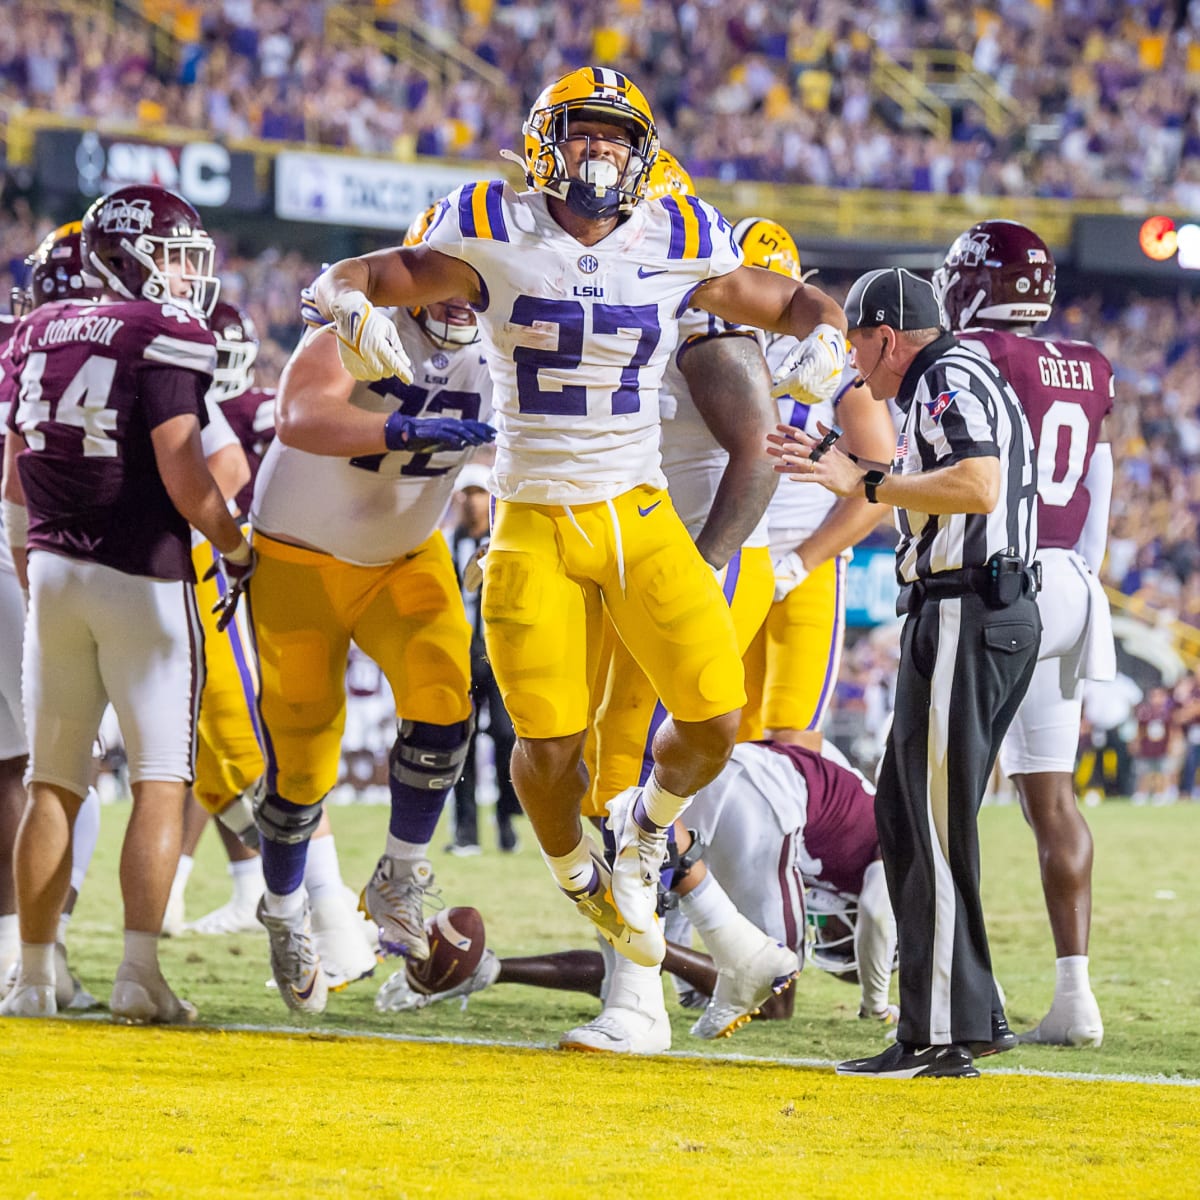 LSU football wears purple uniforms rarely in back-to-back games